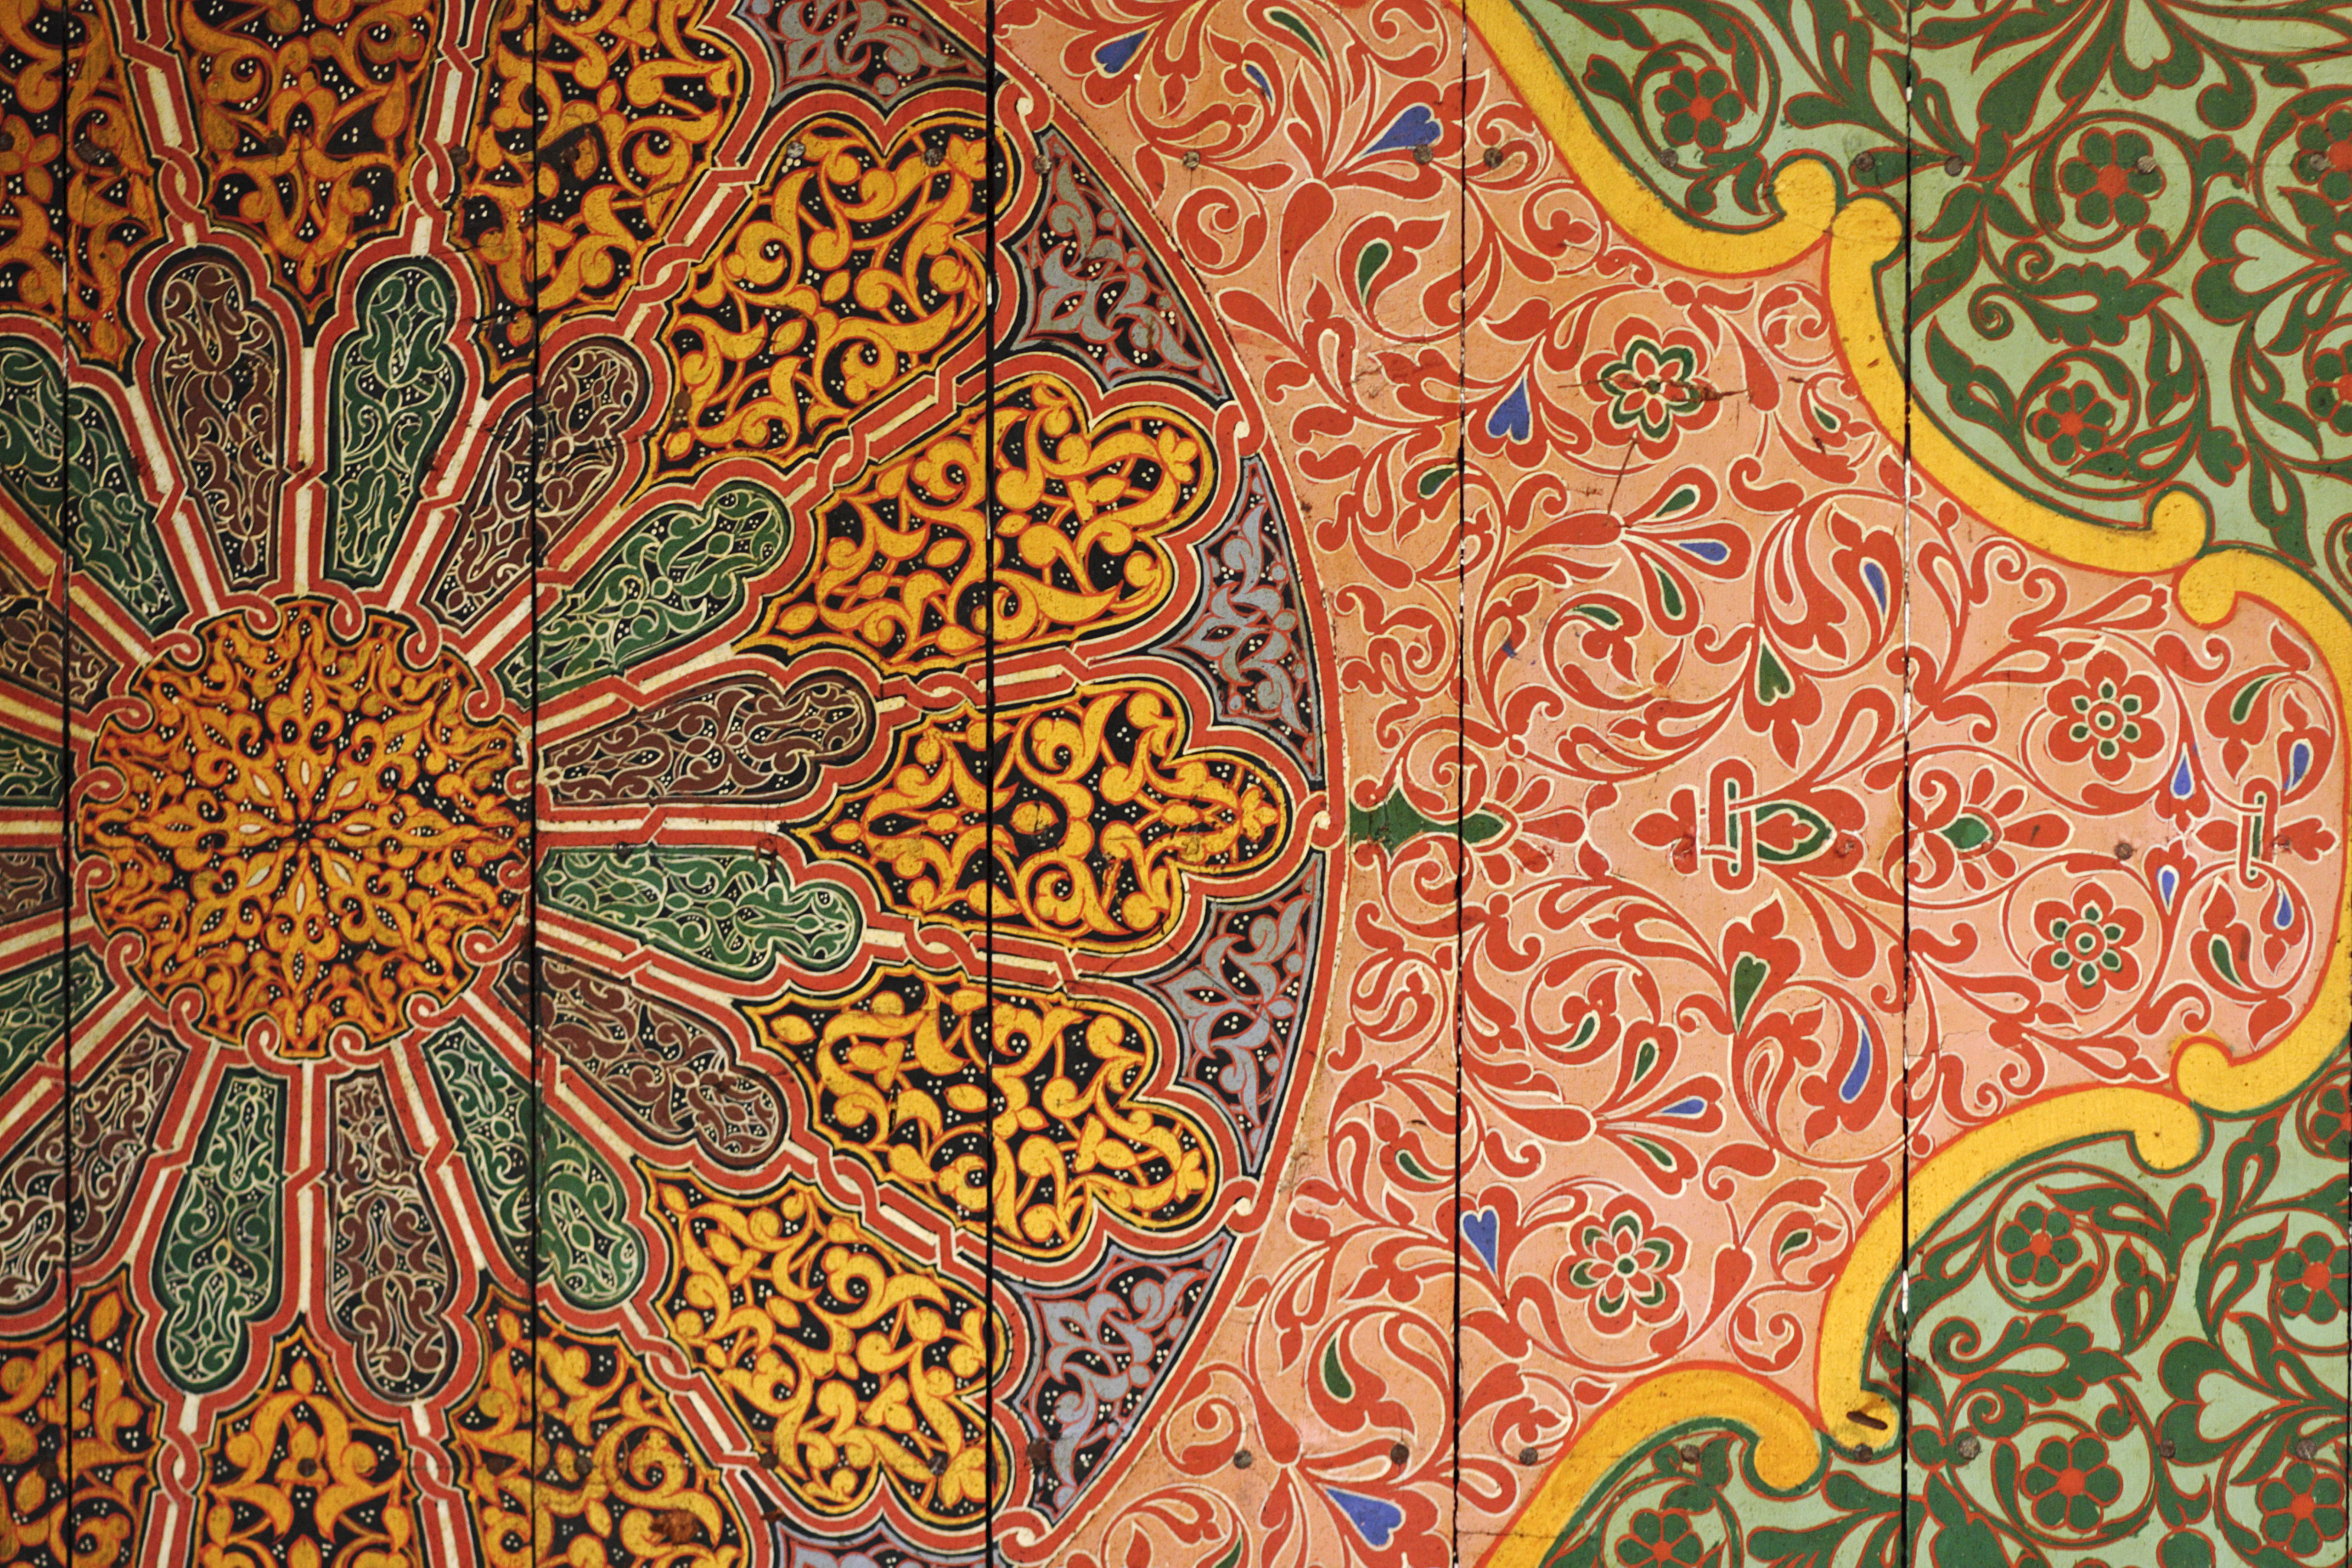 A colourful tiled mural, which appears like a large flower, on the ceiling of the Bahia palace, Marrakesh.